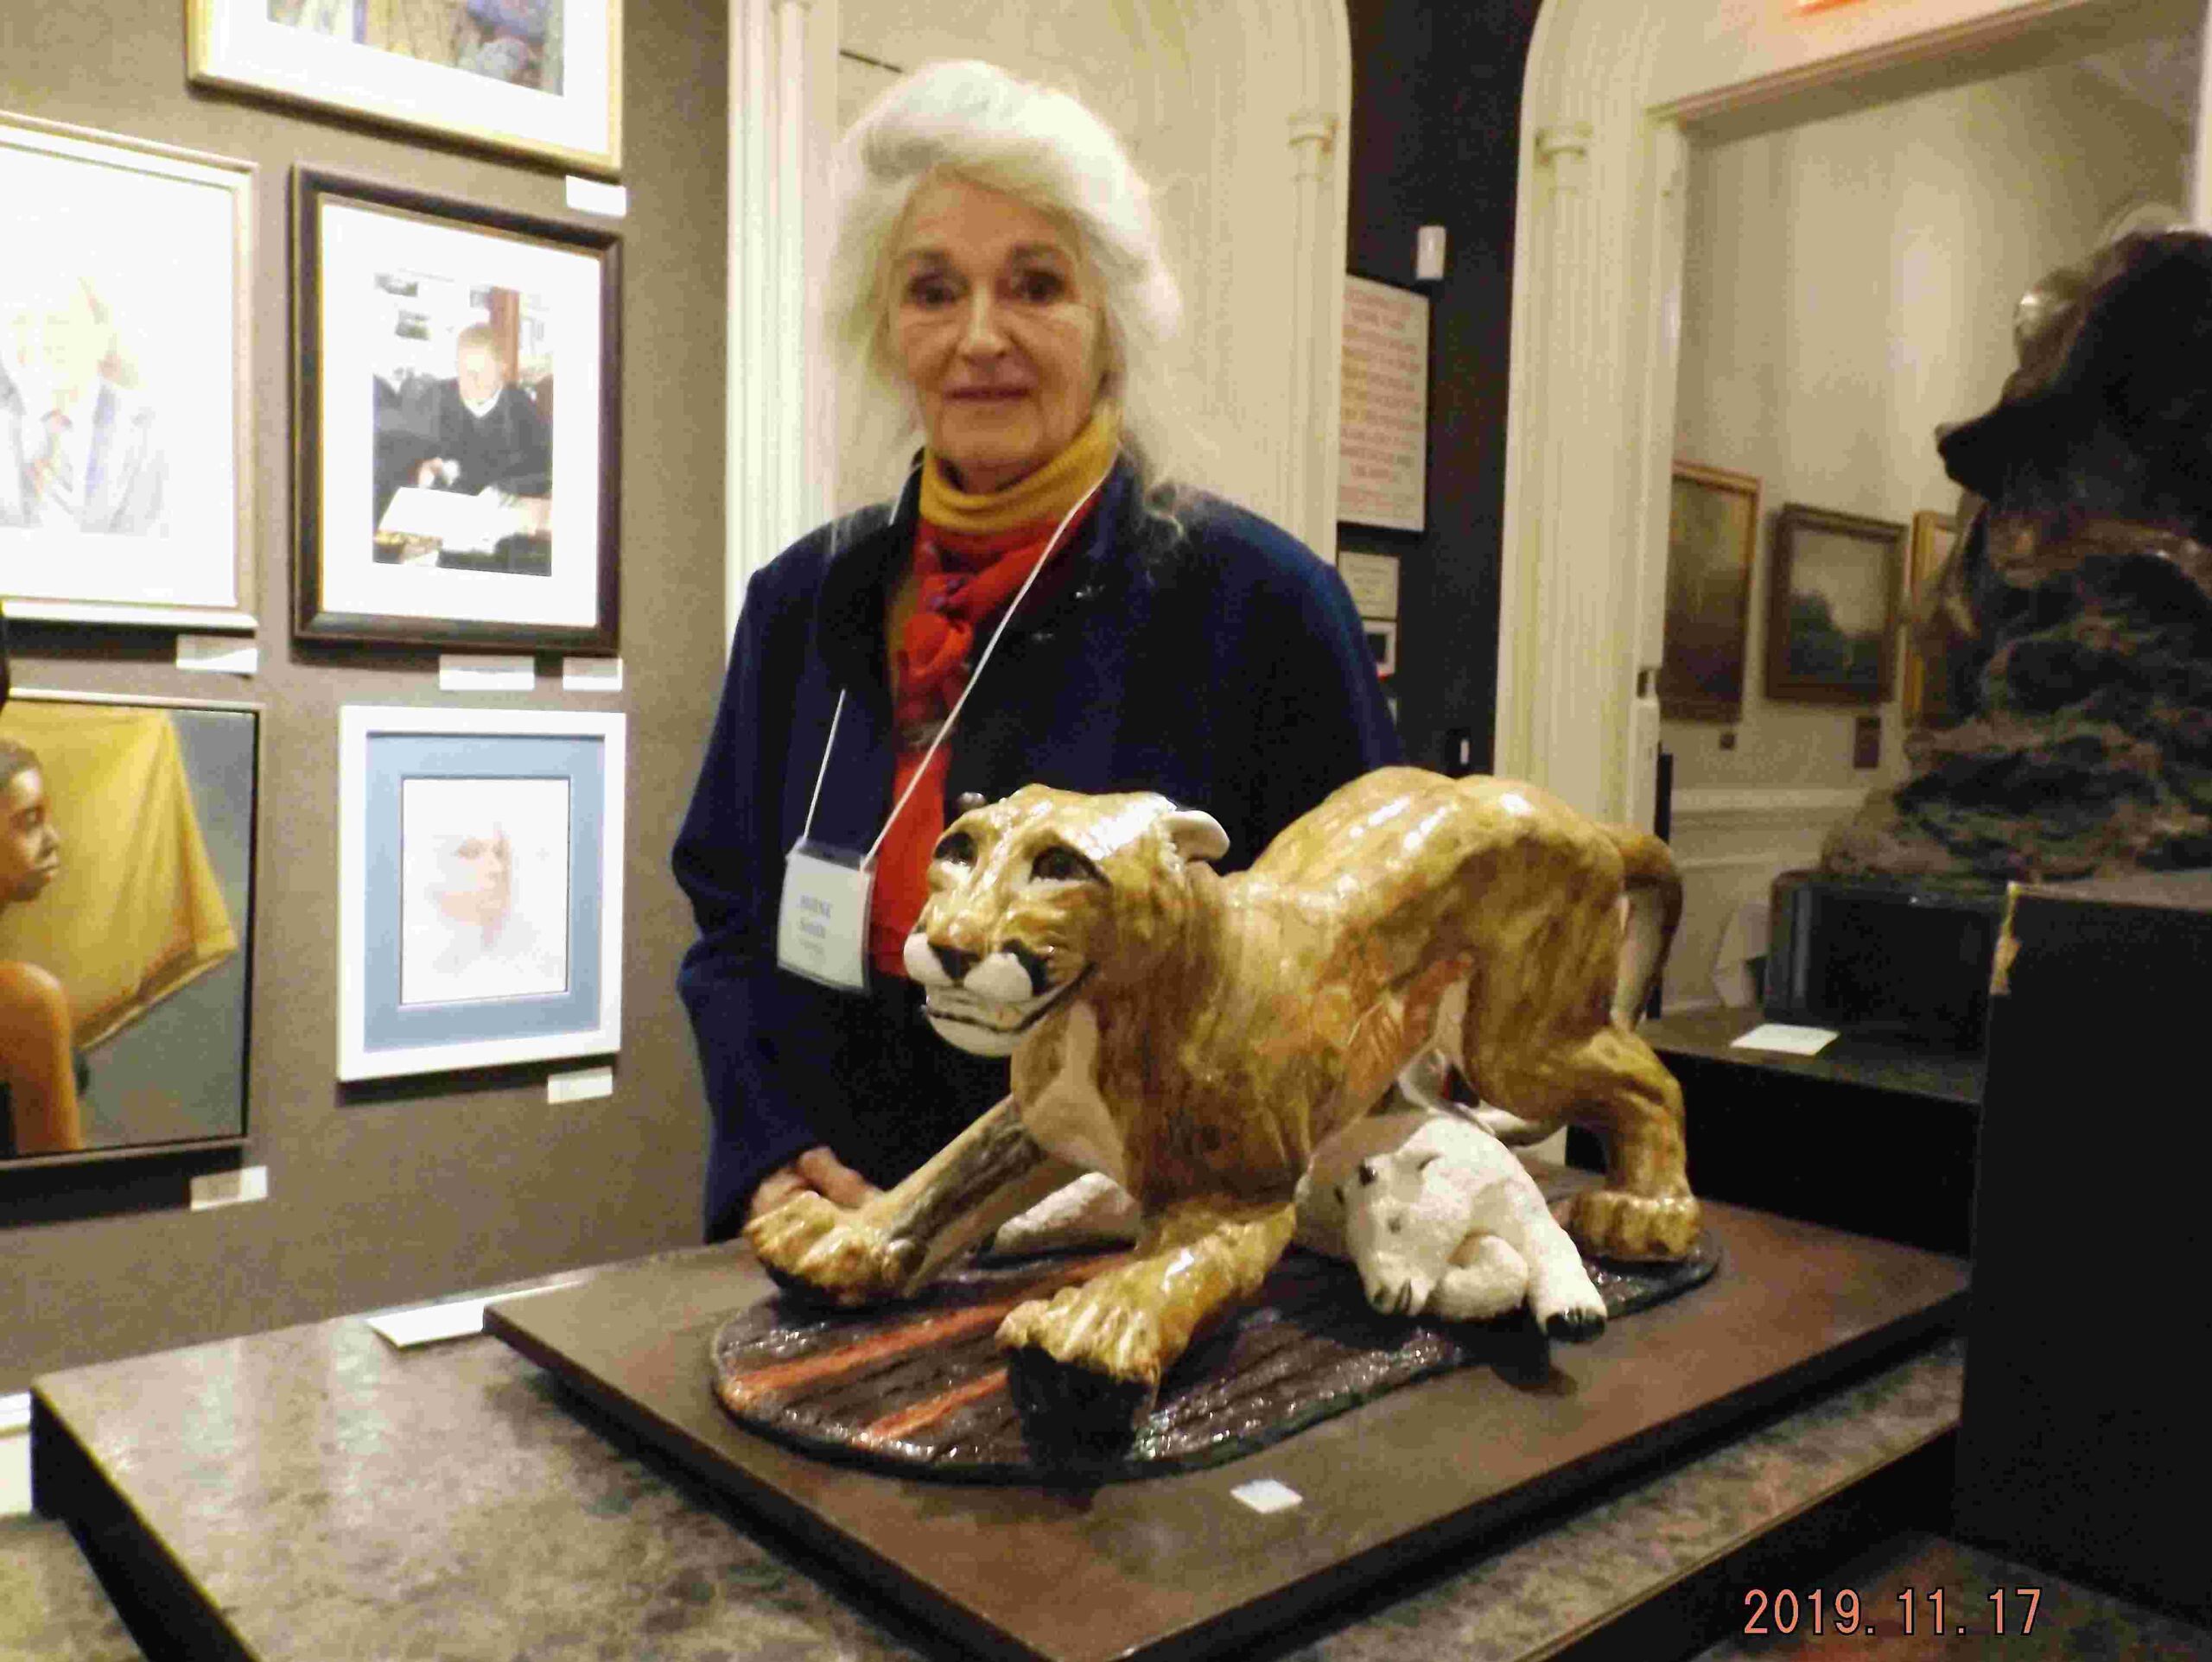 A white-haired woman looks at the viewer from behind a sculpture of a wild cat, standing over a collapsed lamb.